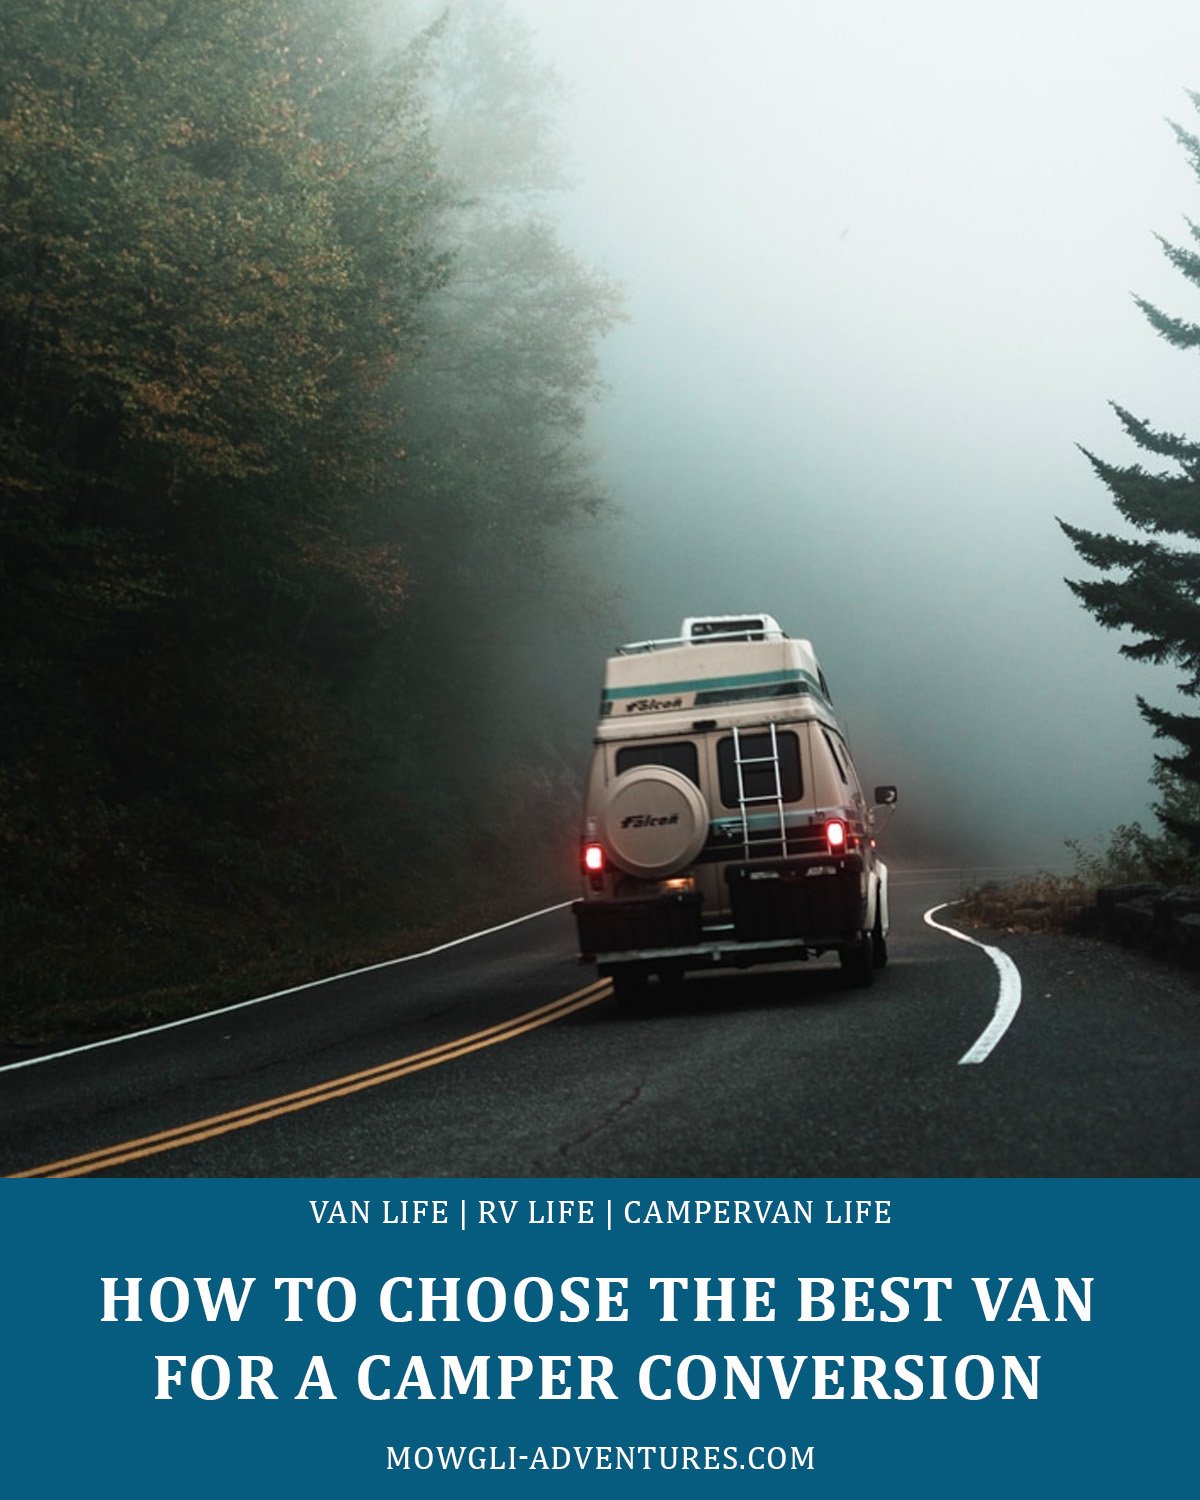 How to Choose the Best Van for a Camper Conversion